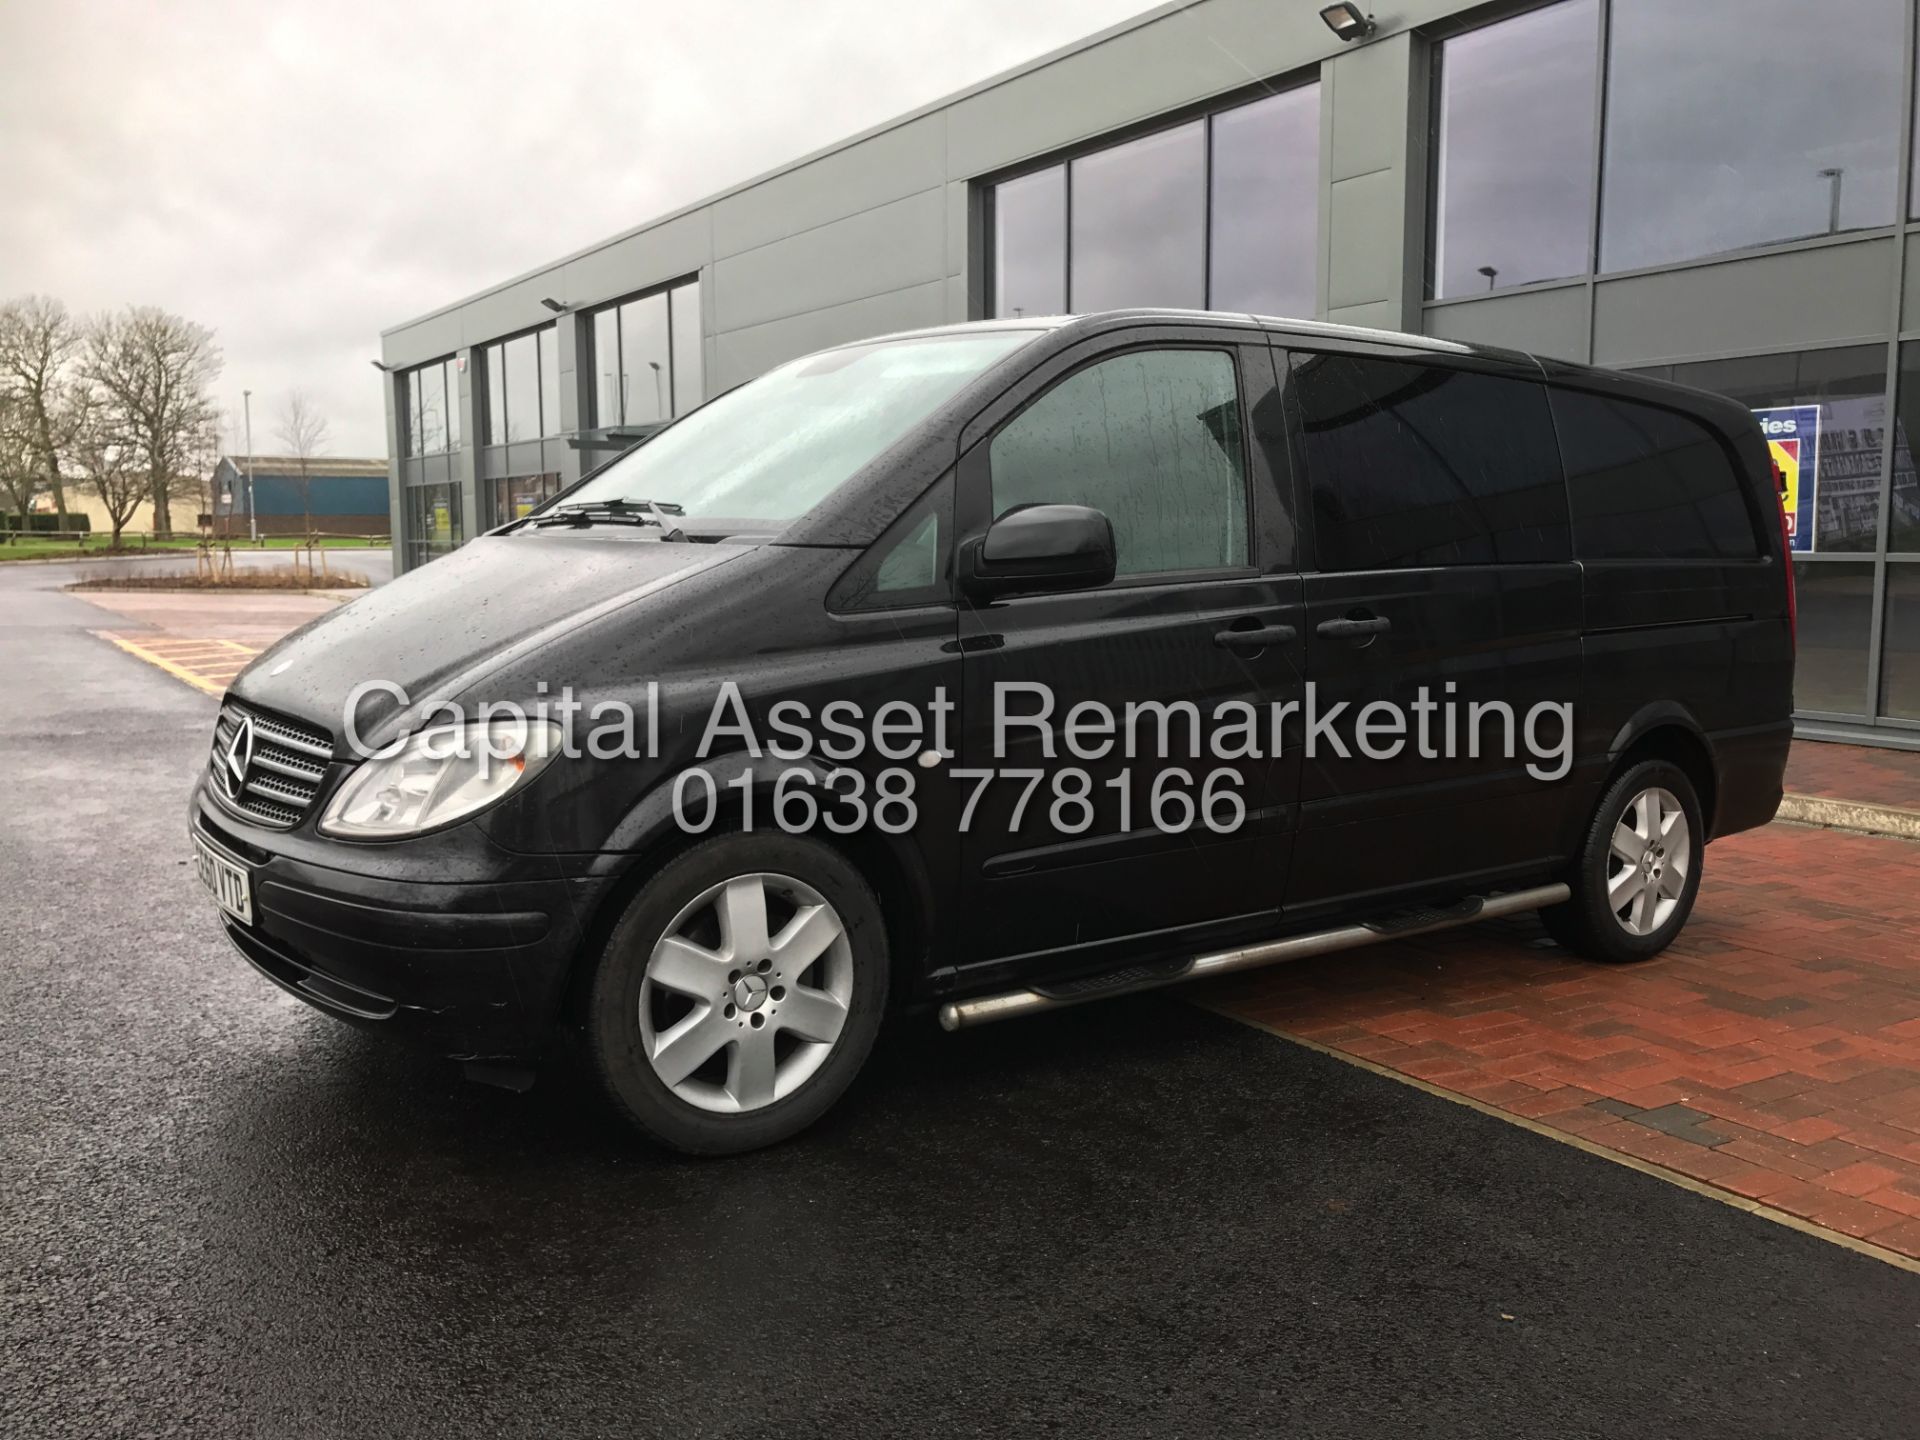 (ON SALE) MERCEDES VITO "SPORTY - 115BHP" LWB (2011 MODEL) 5 SEATER DUELINER -1 OWNER-AIR CON-ALLOYS - Image 5 of 18